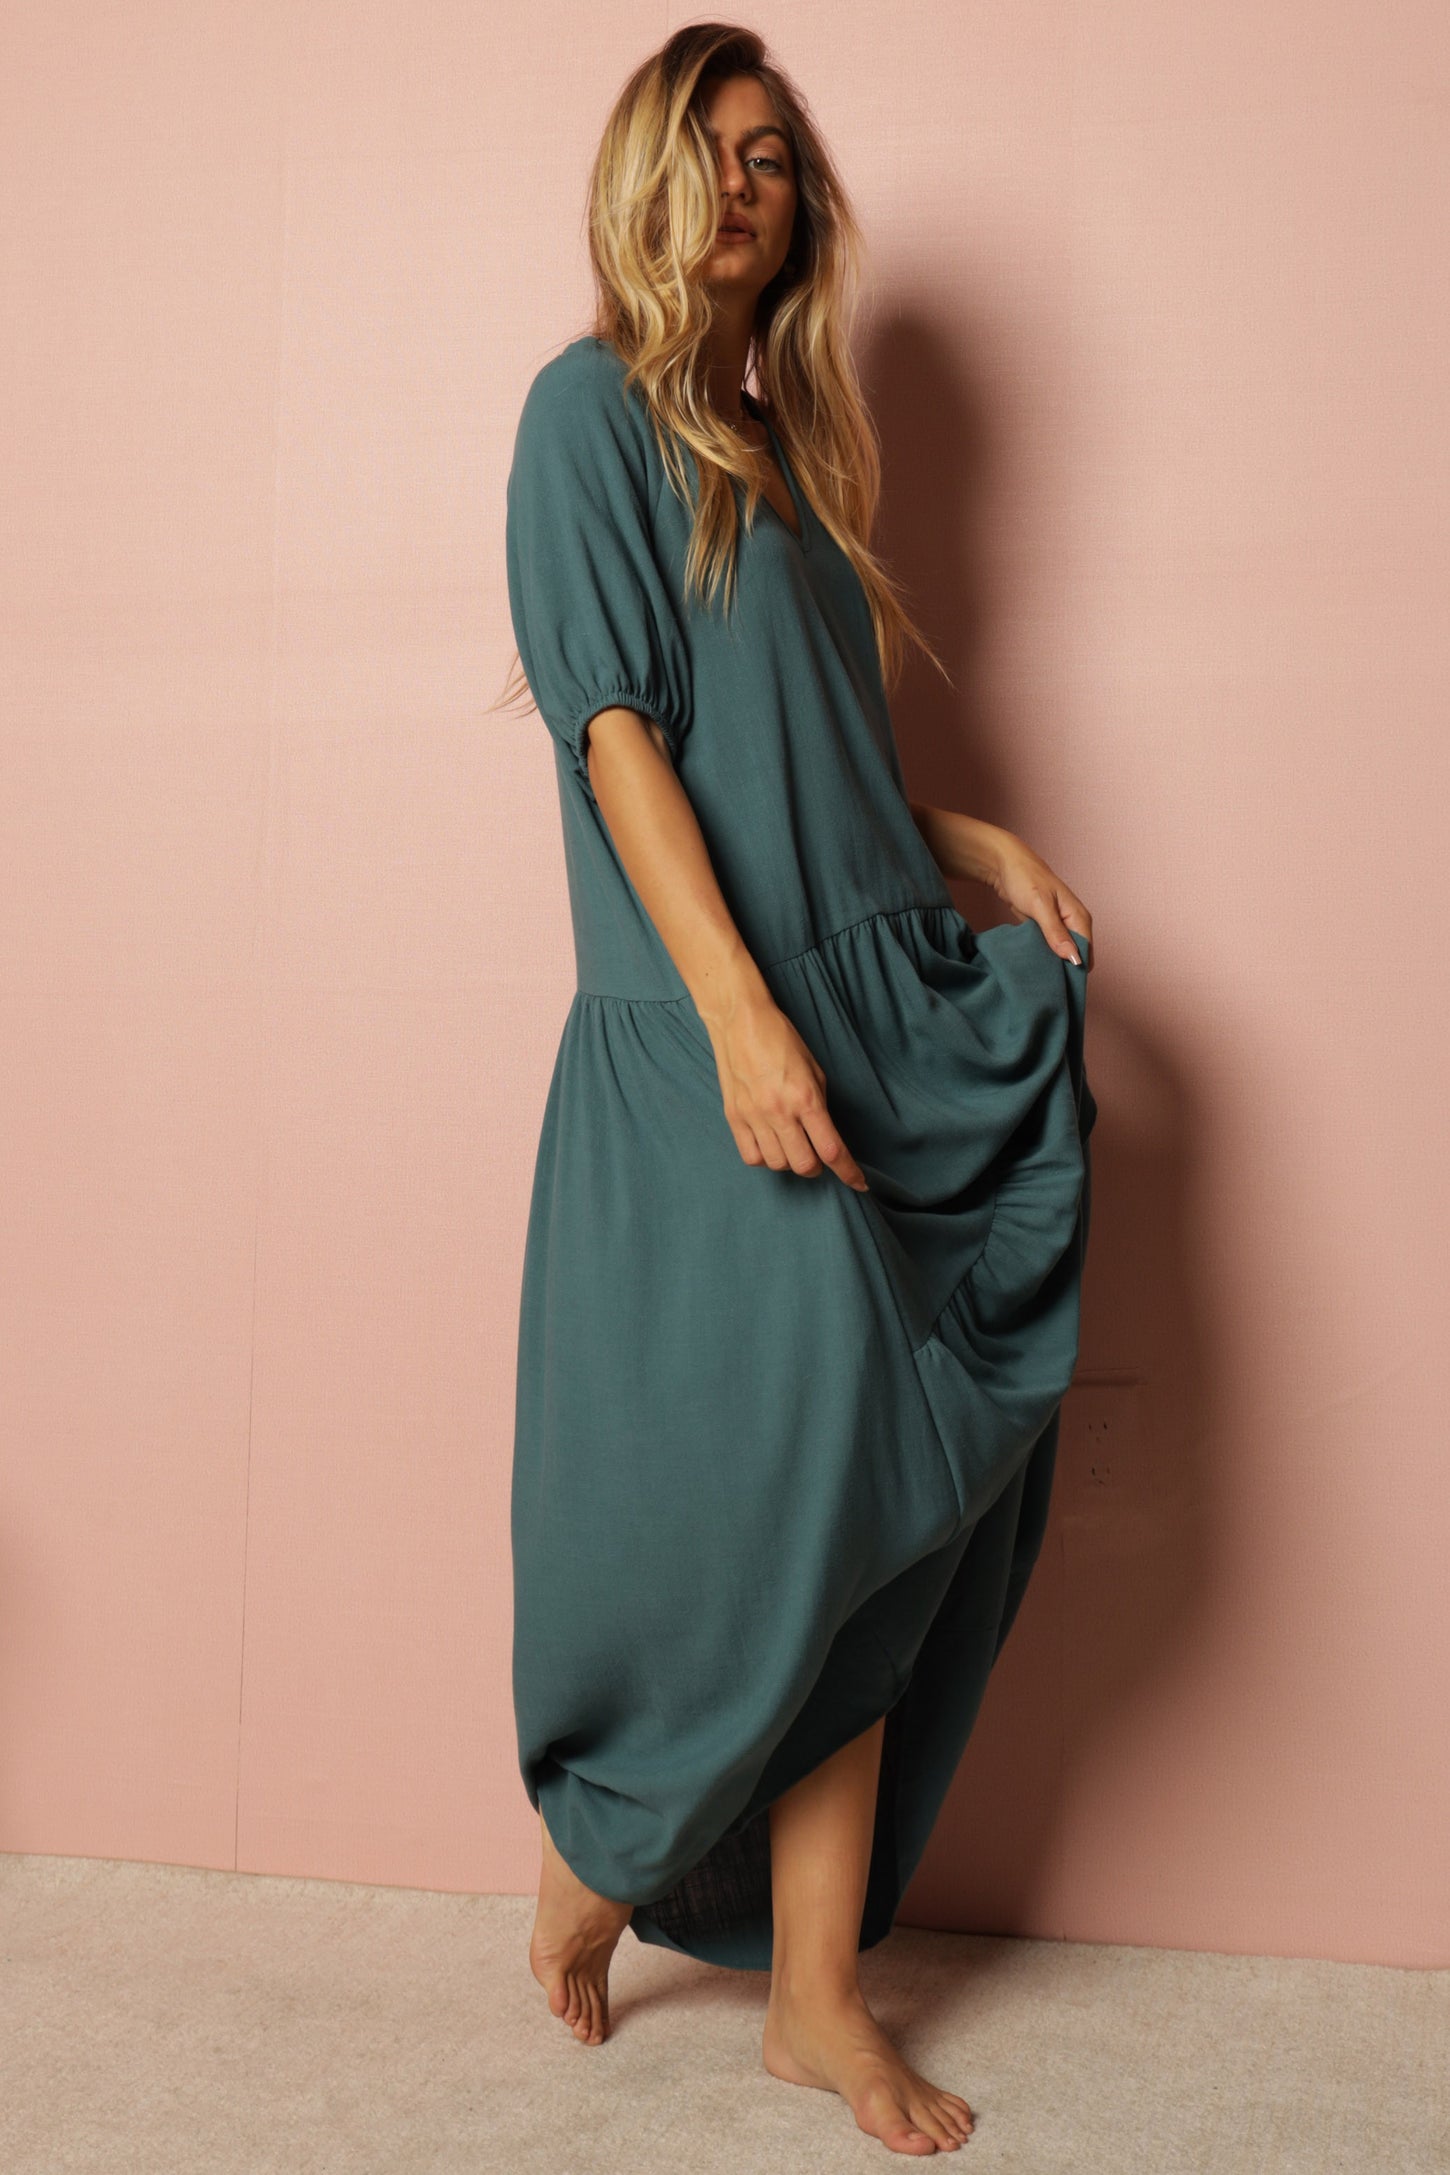 Turquoise Linen Tiered Dress